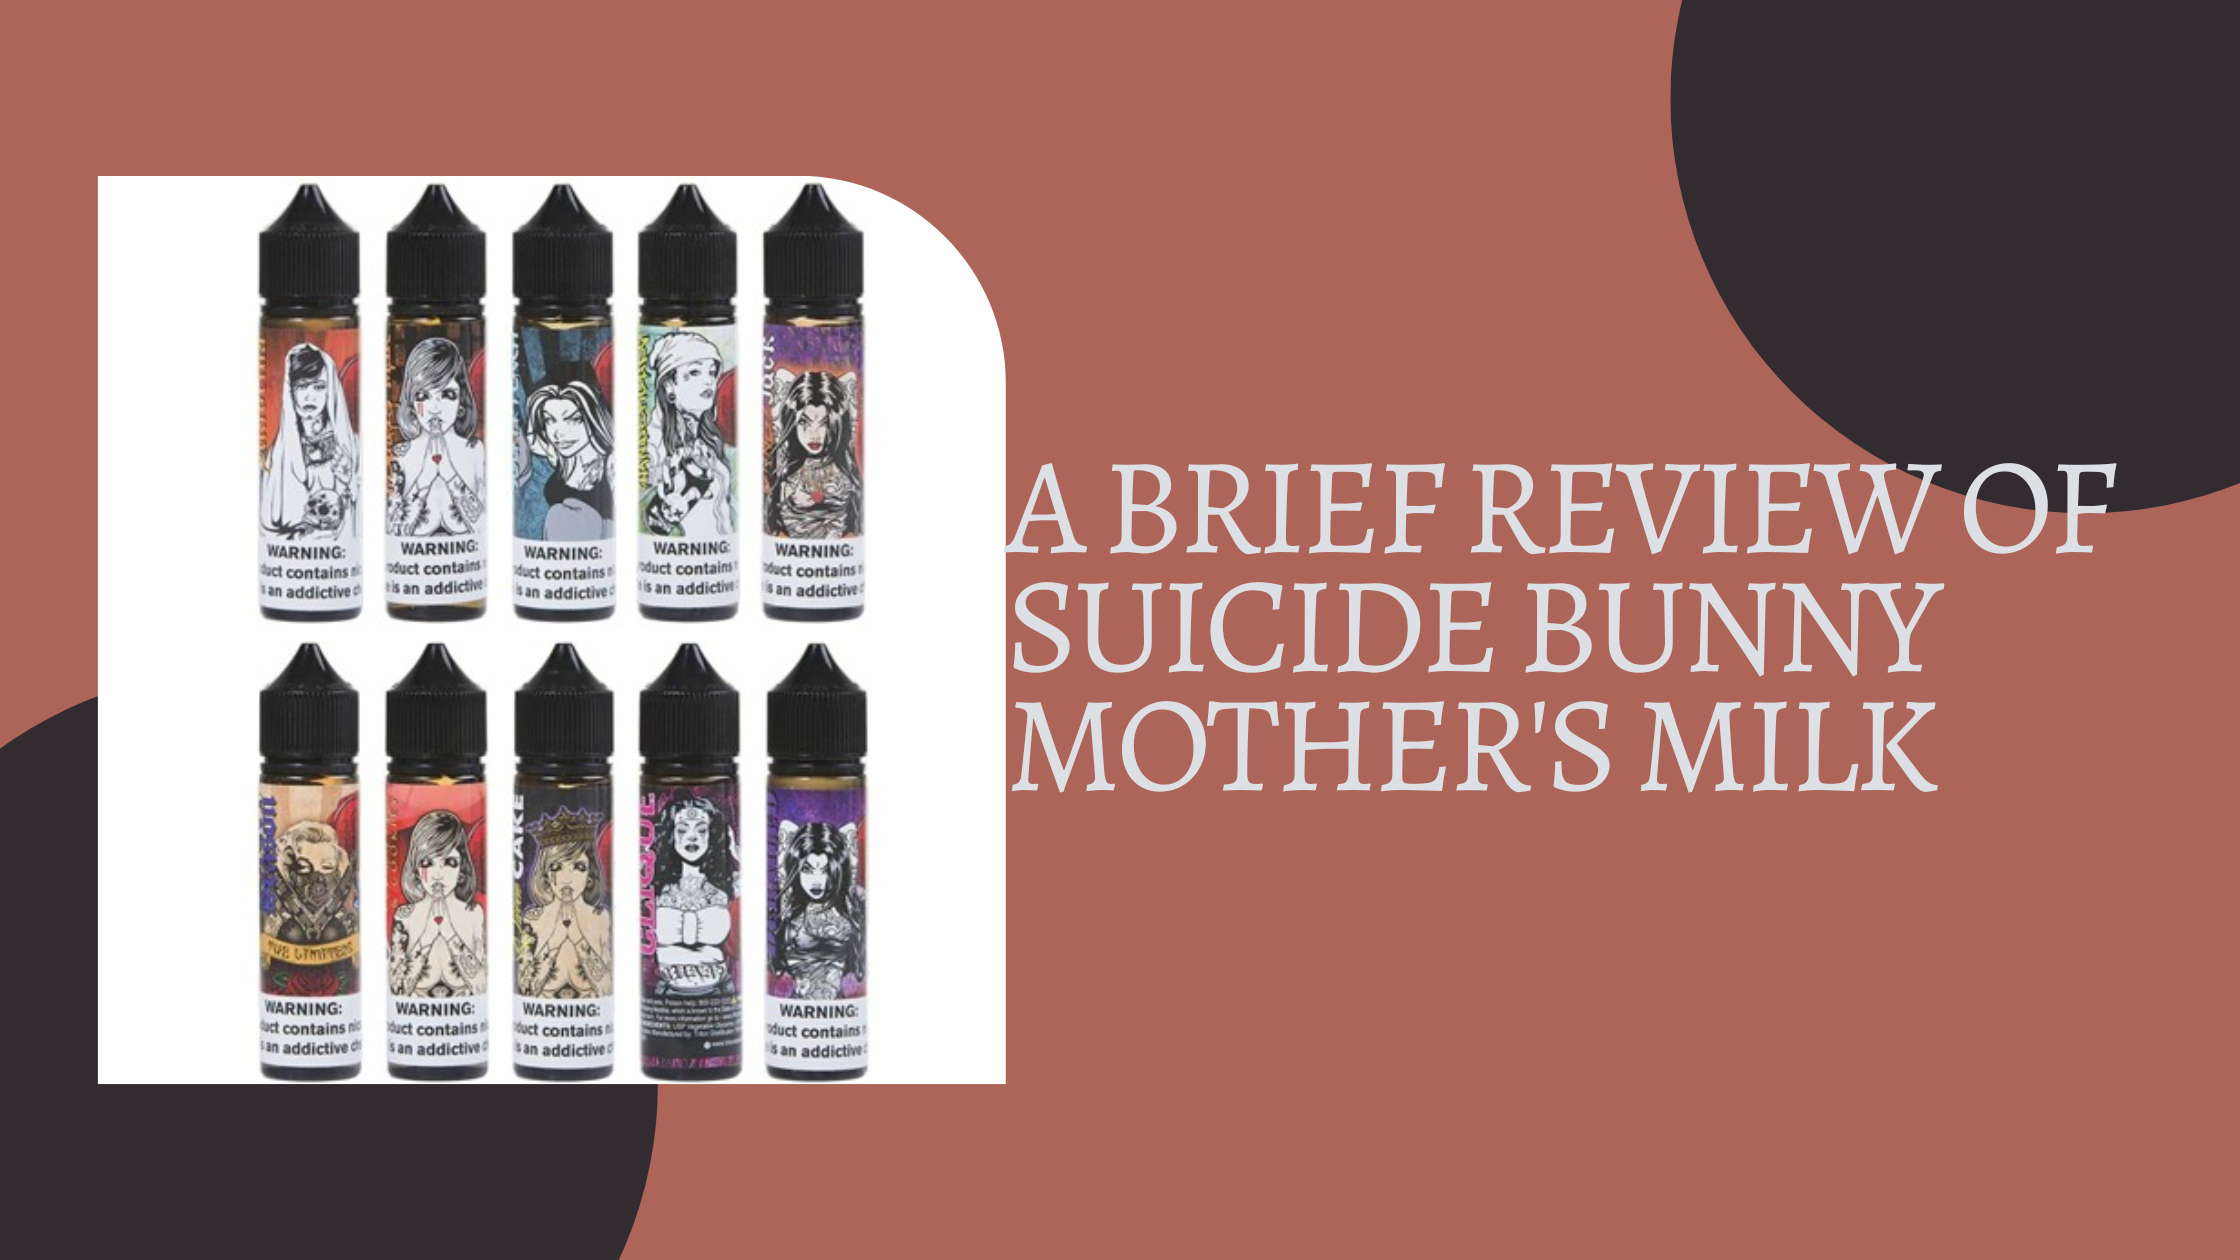 A Brief Review of Suicide Bunny Mother's Milk